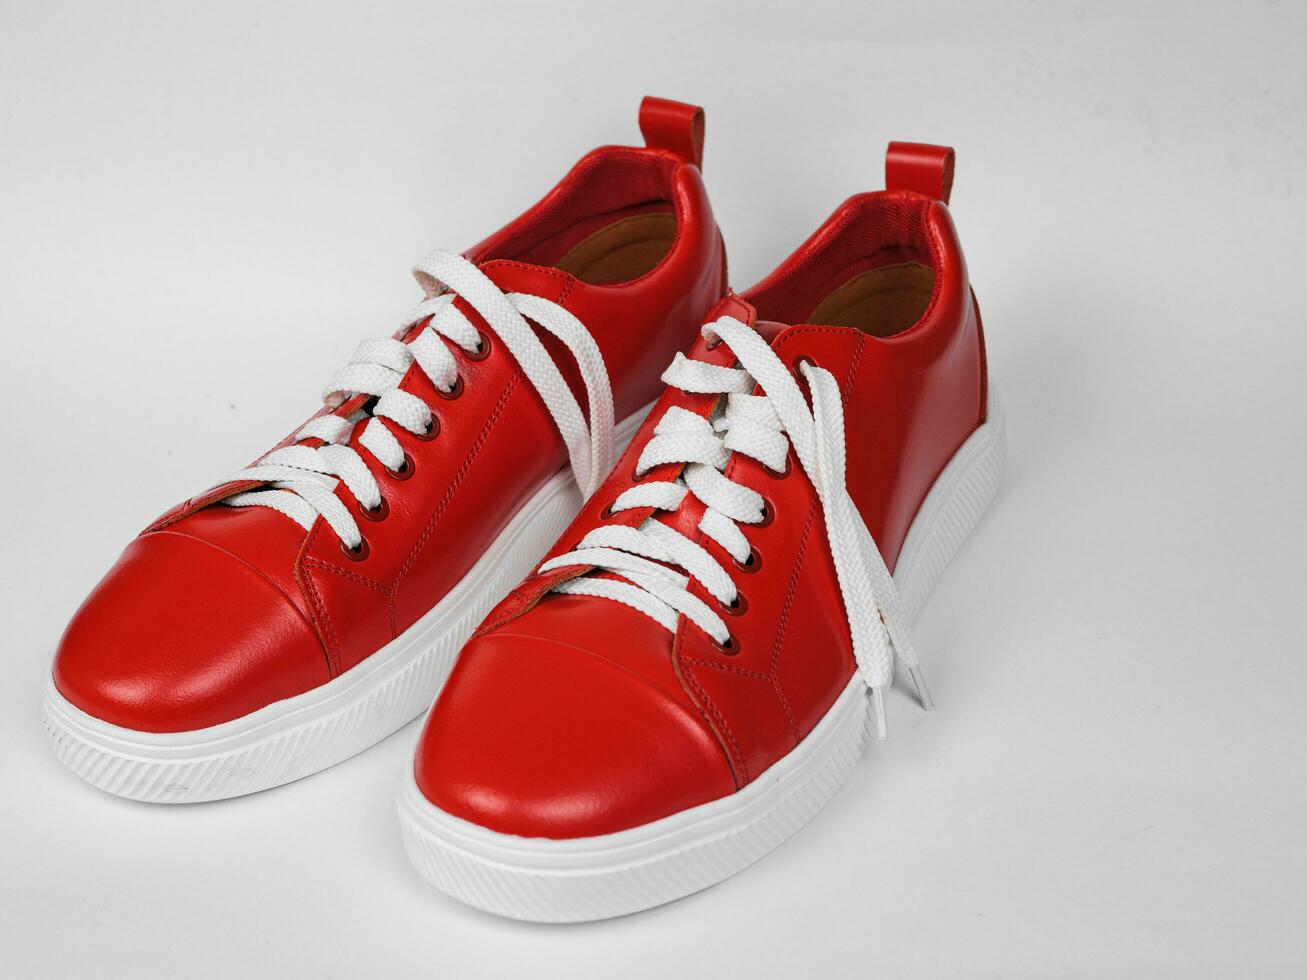 Red leather sneakers with white soles-5 photo